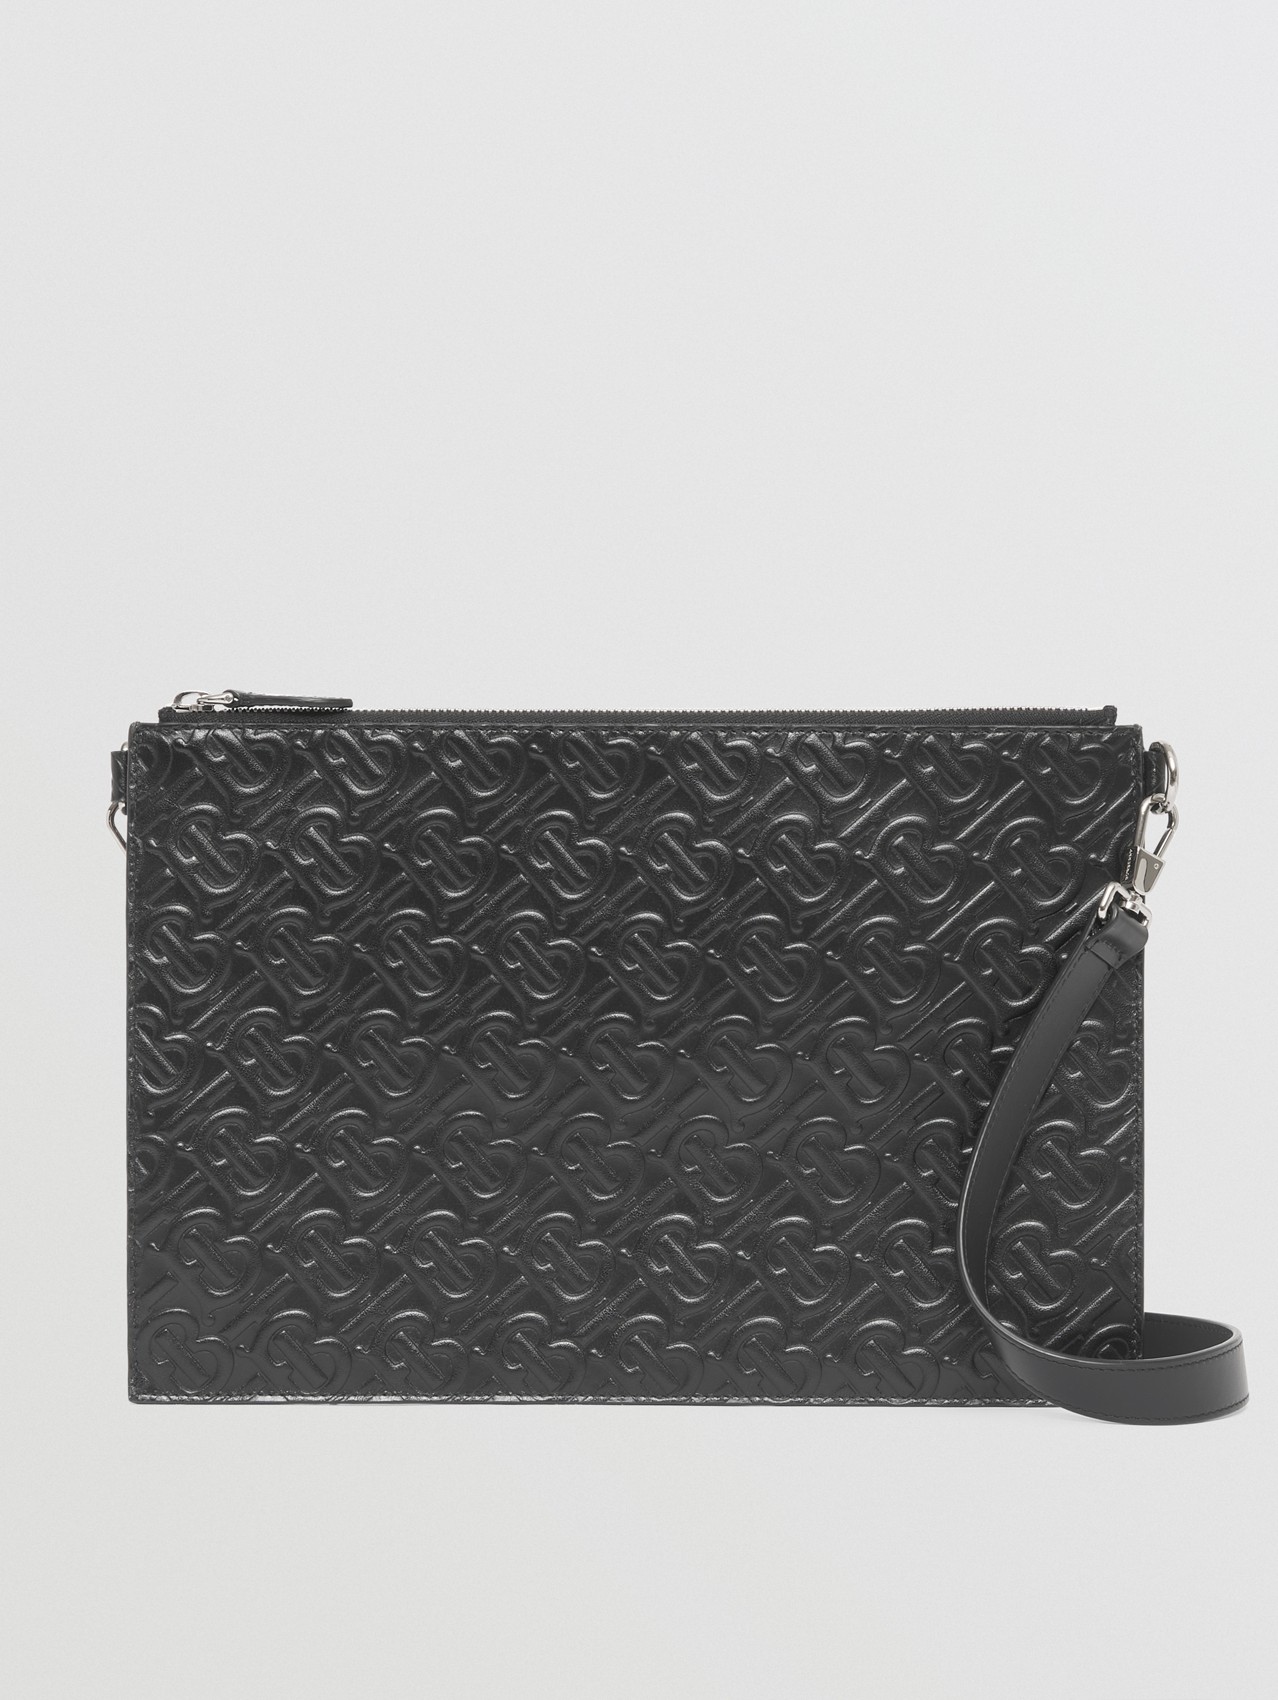 Embossed Monogram Leather Zip Pouch in Black